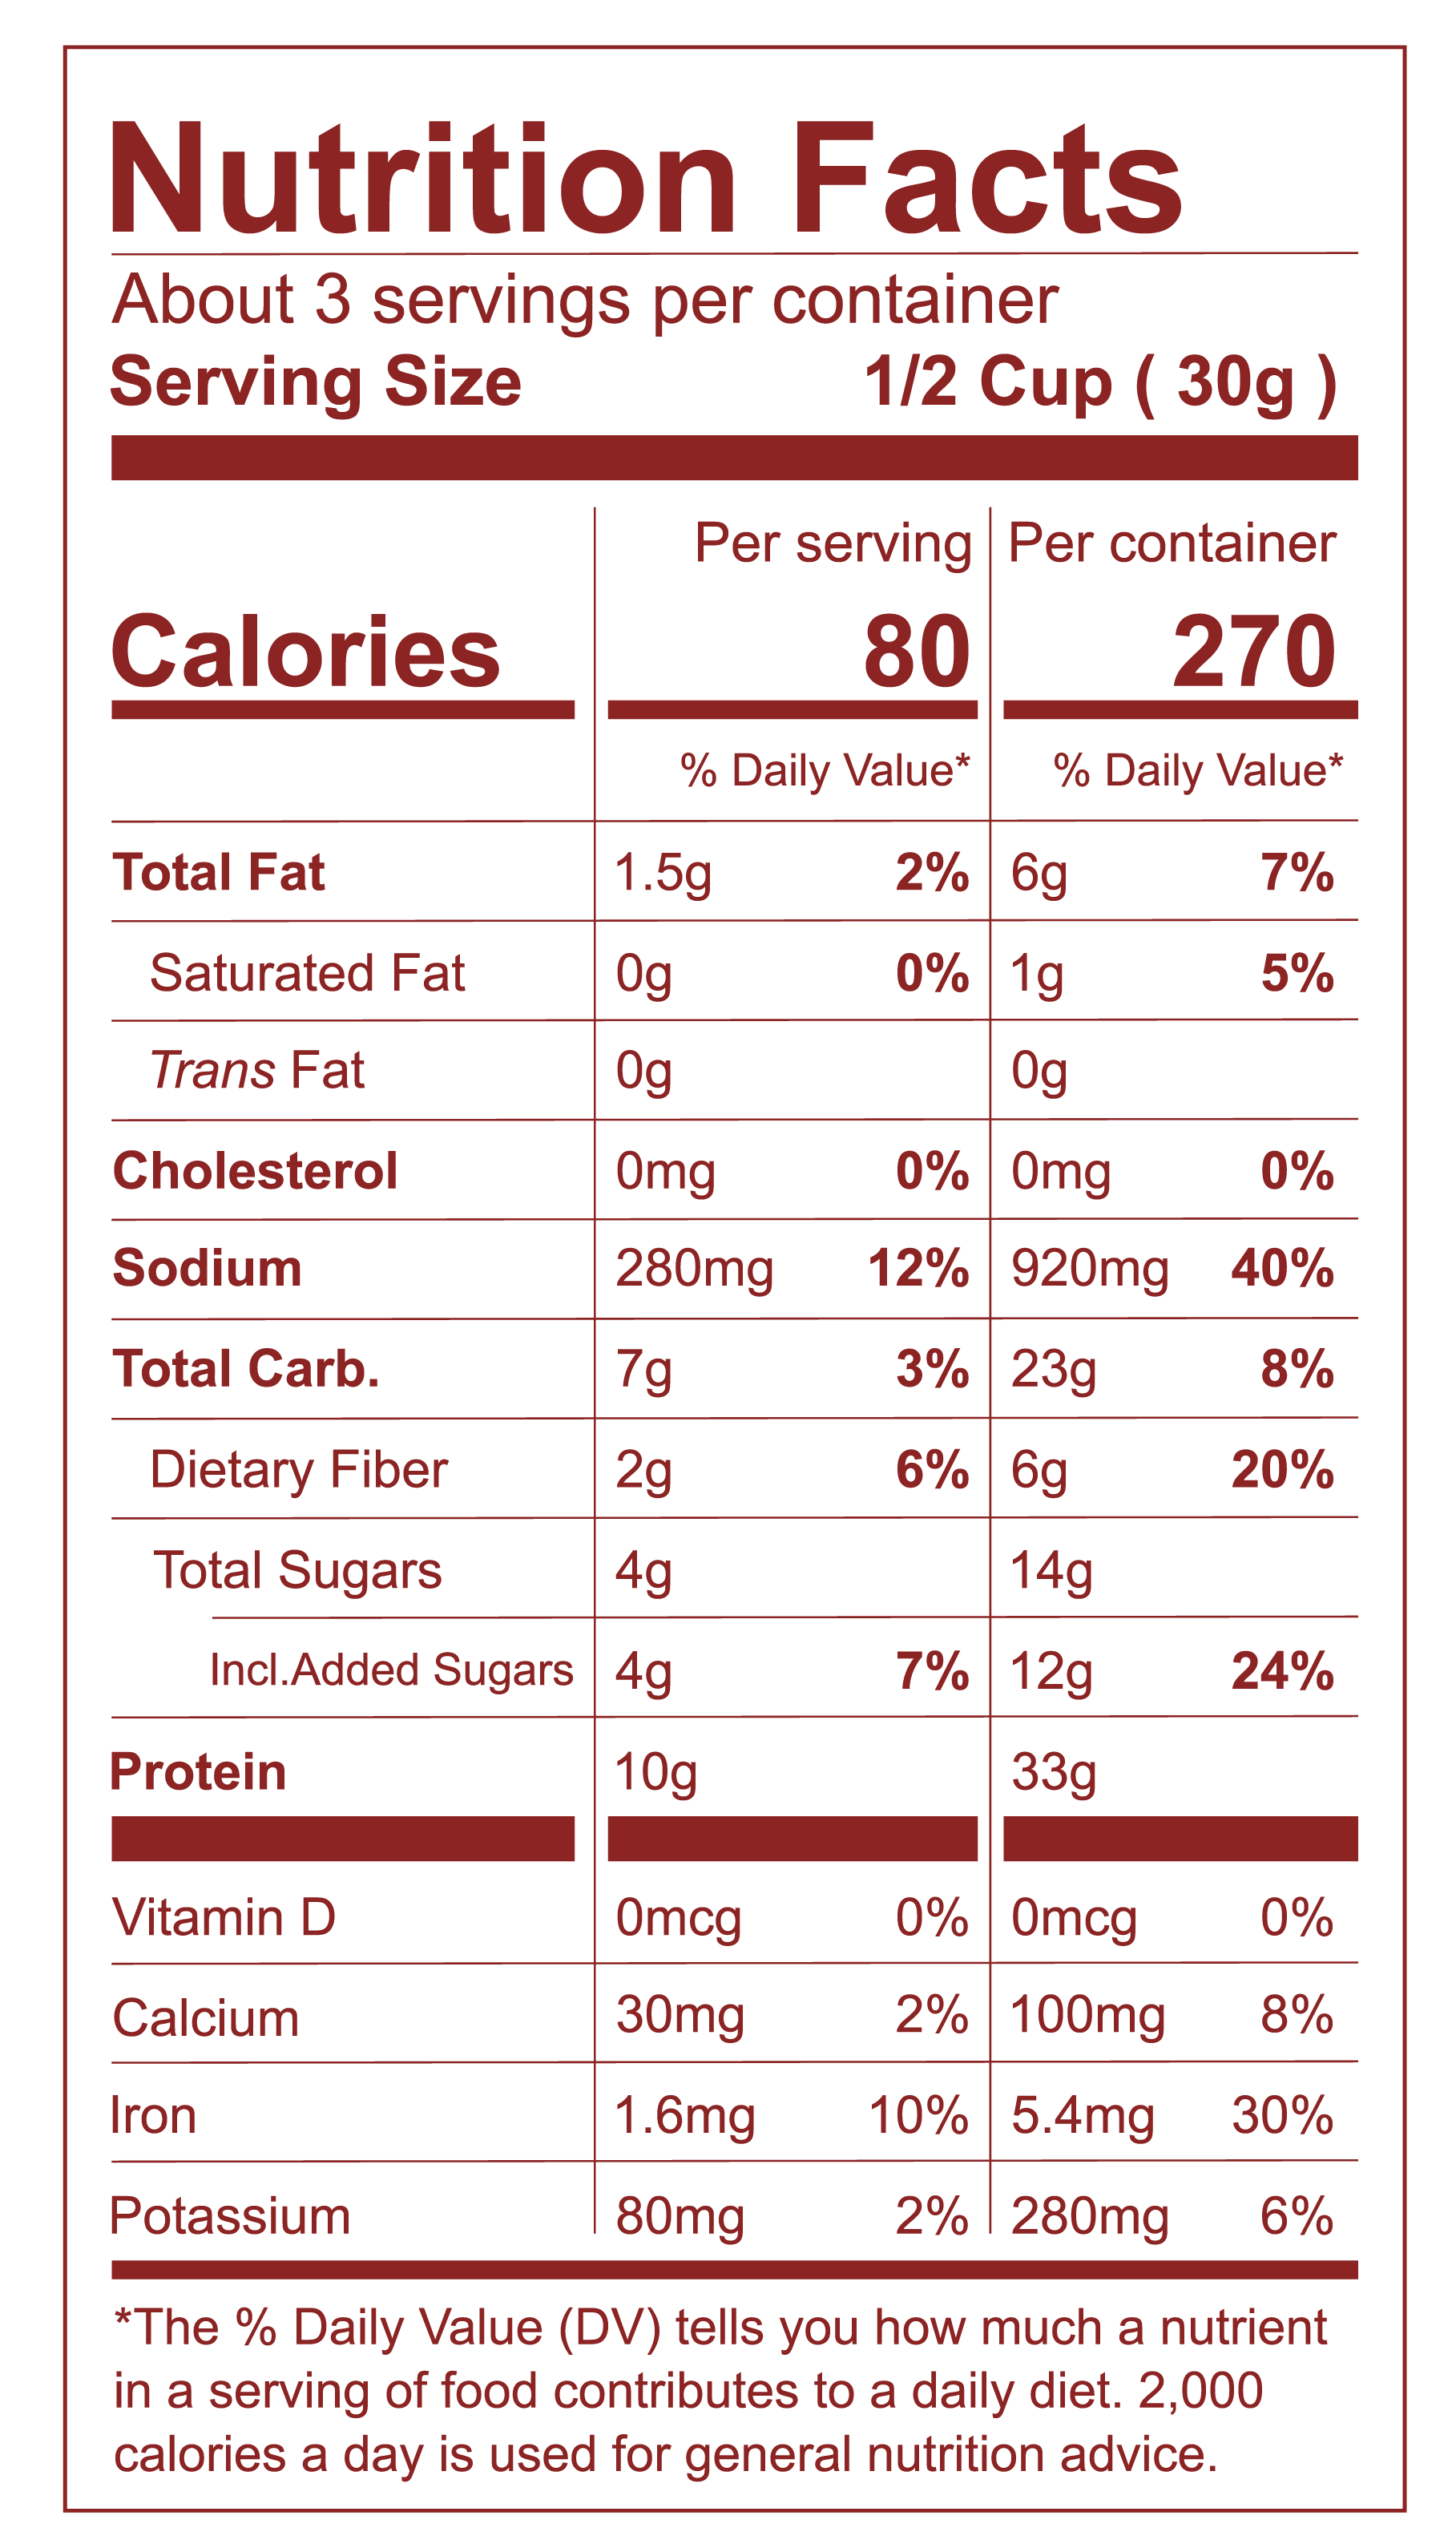 SMOKED Nutrition Facts